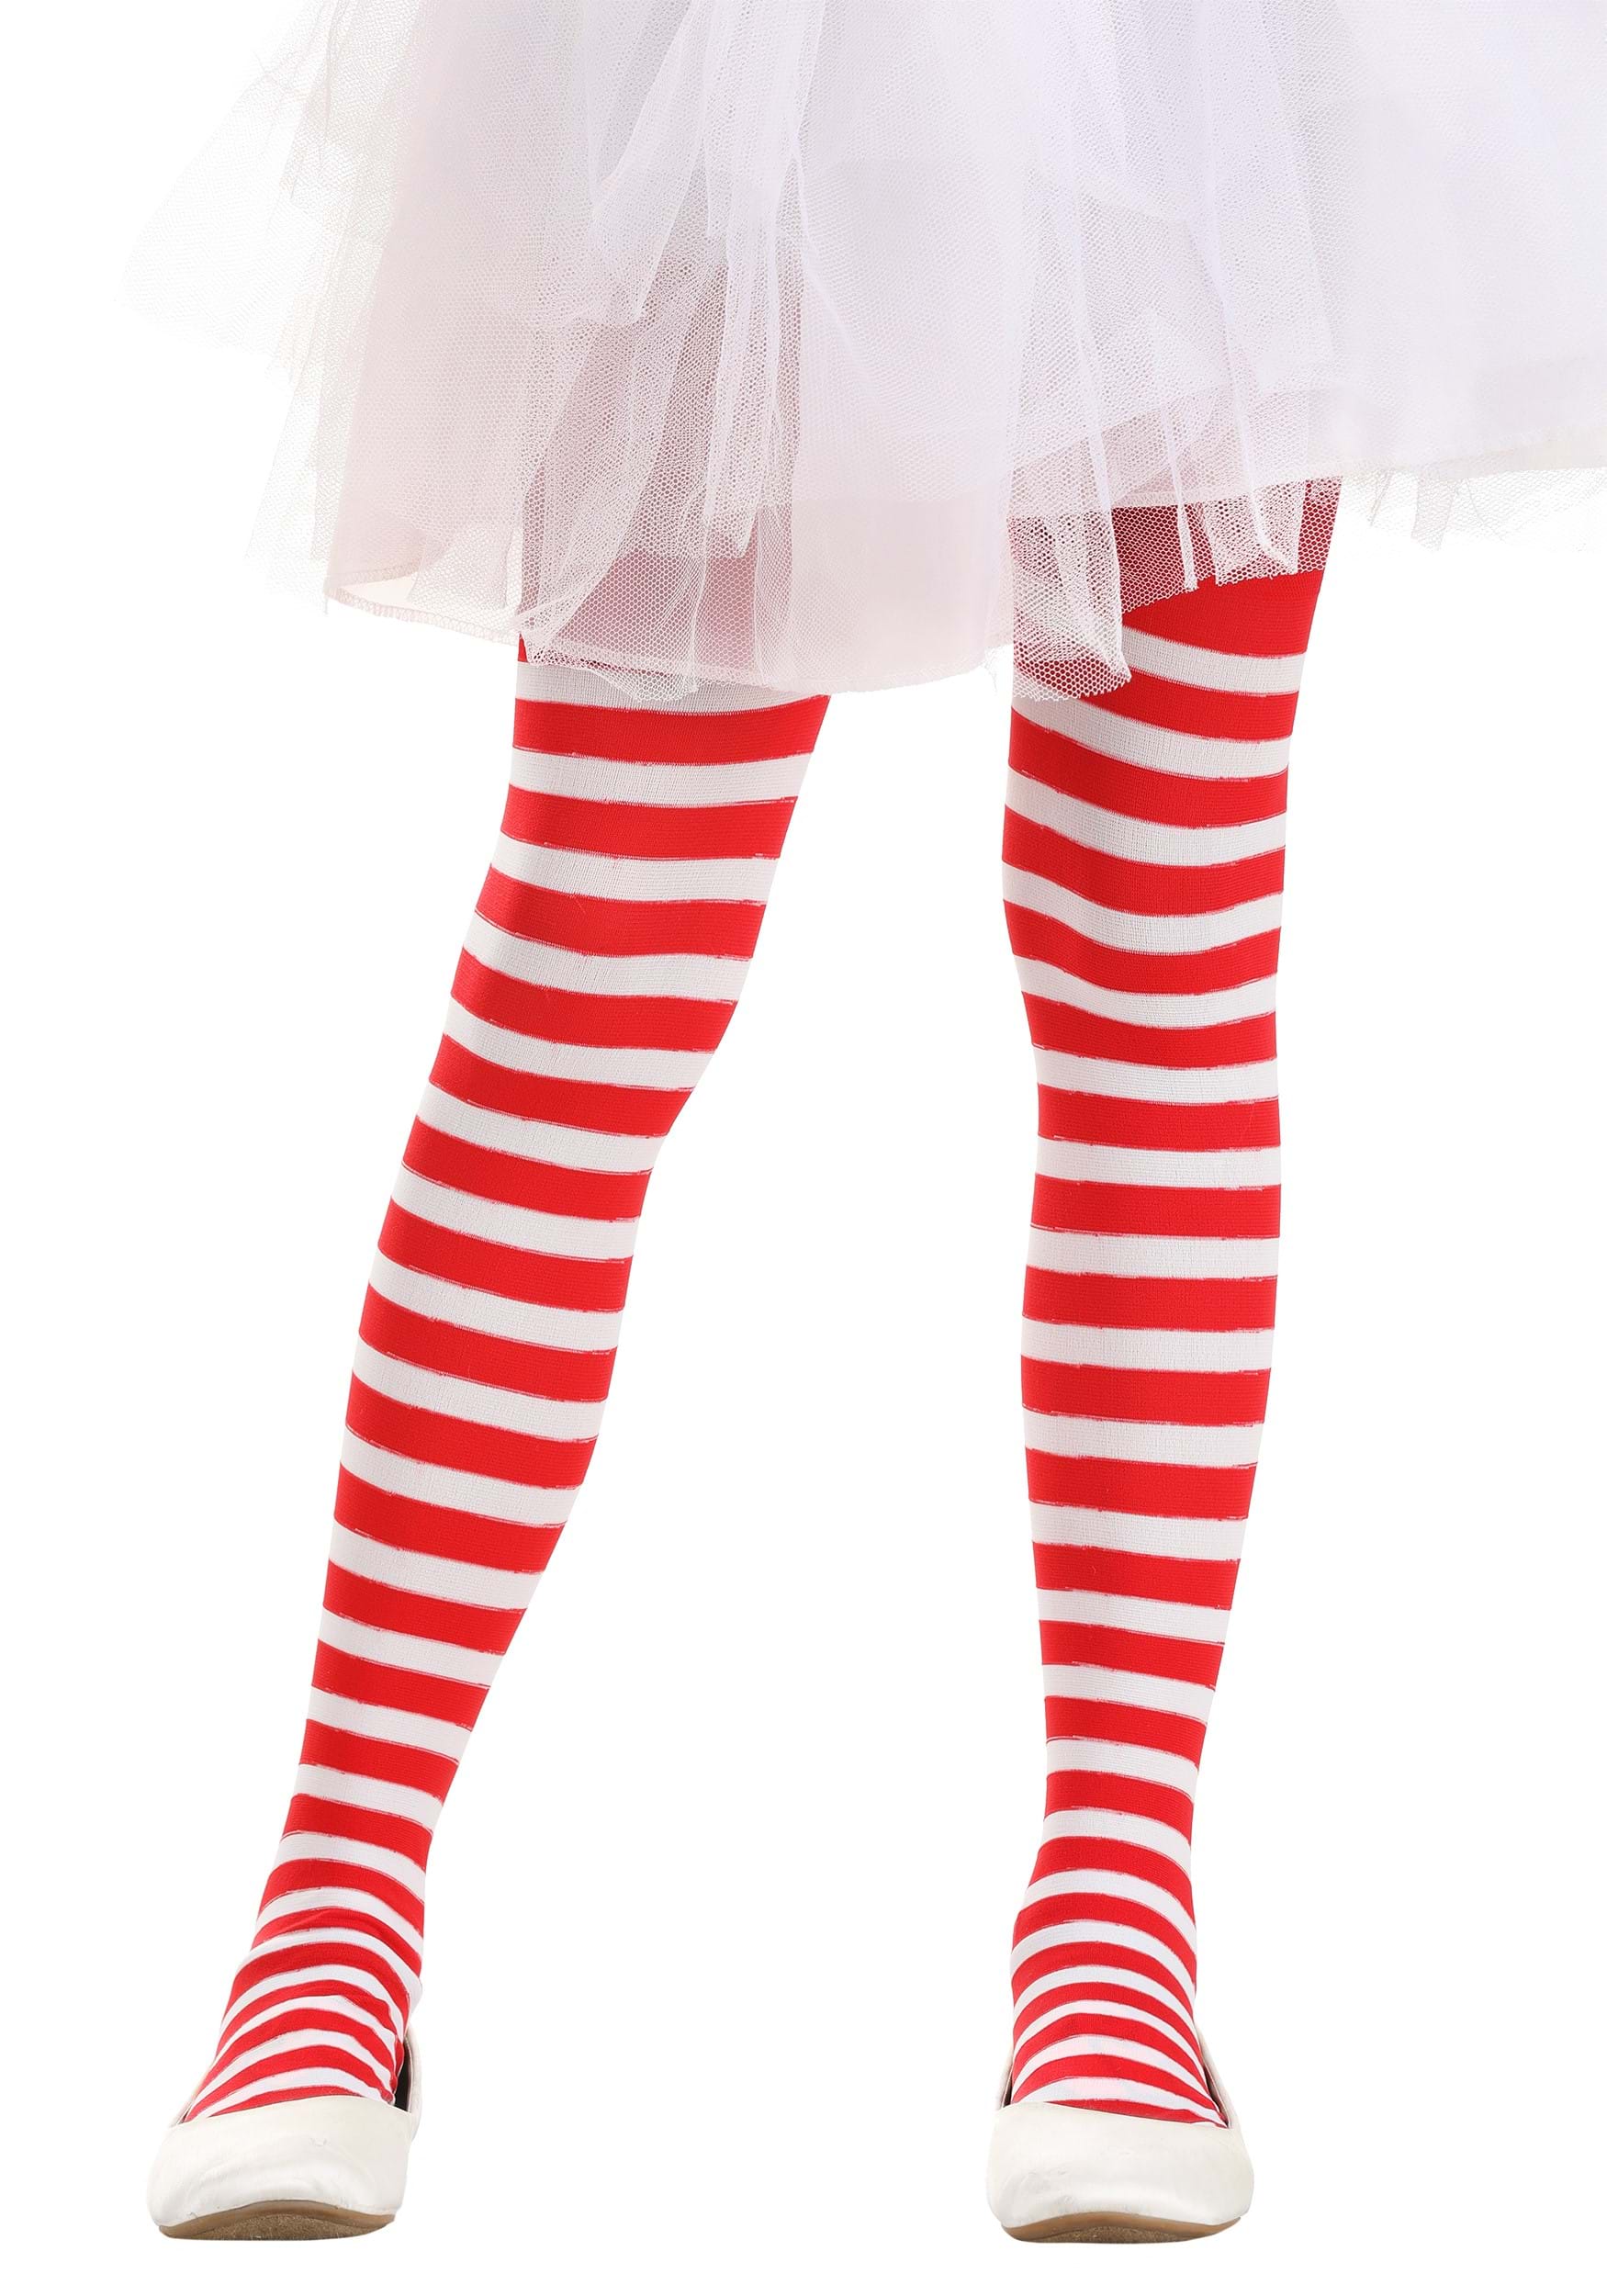 Christmas Pantyhose Candy Cane Striped Leggings Tights for Holiday